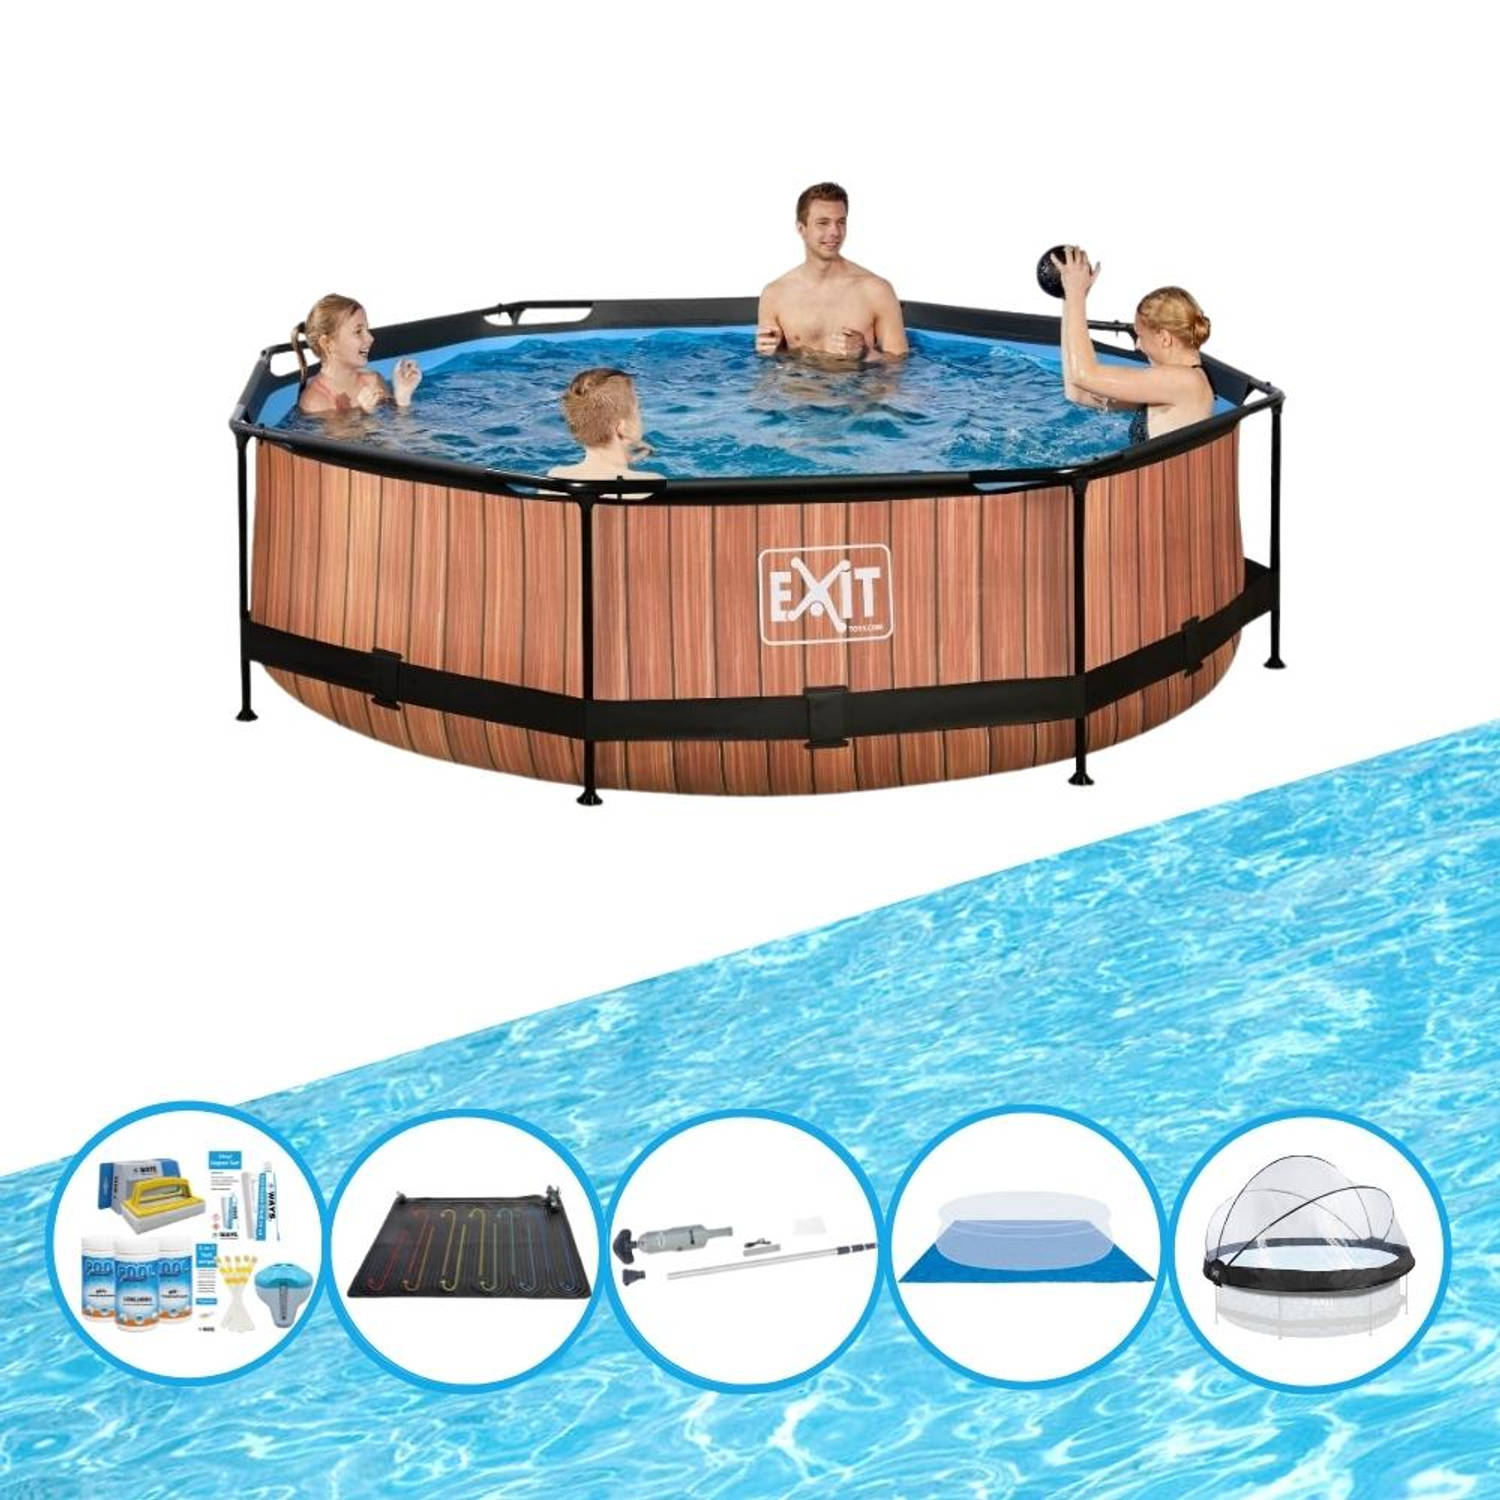 EXIT Zwembad Timber Style - ø300x76 cm - Frame Pool - Met accessoires